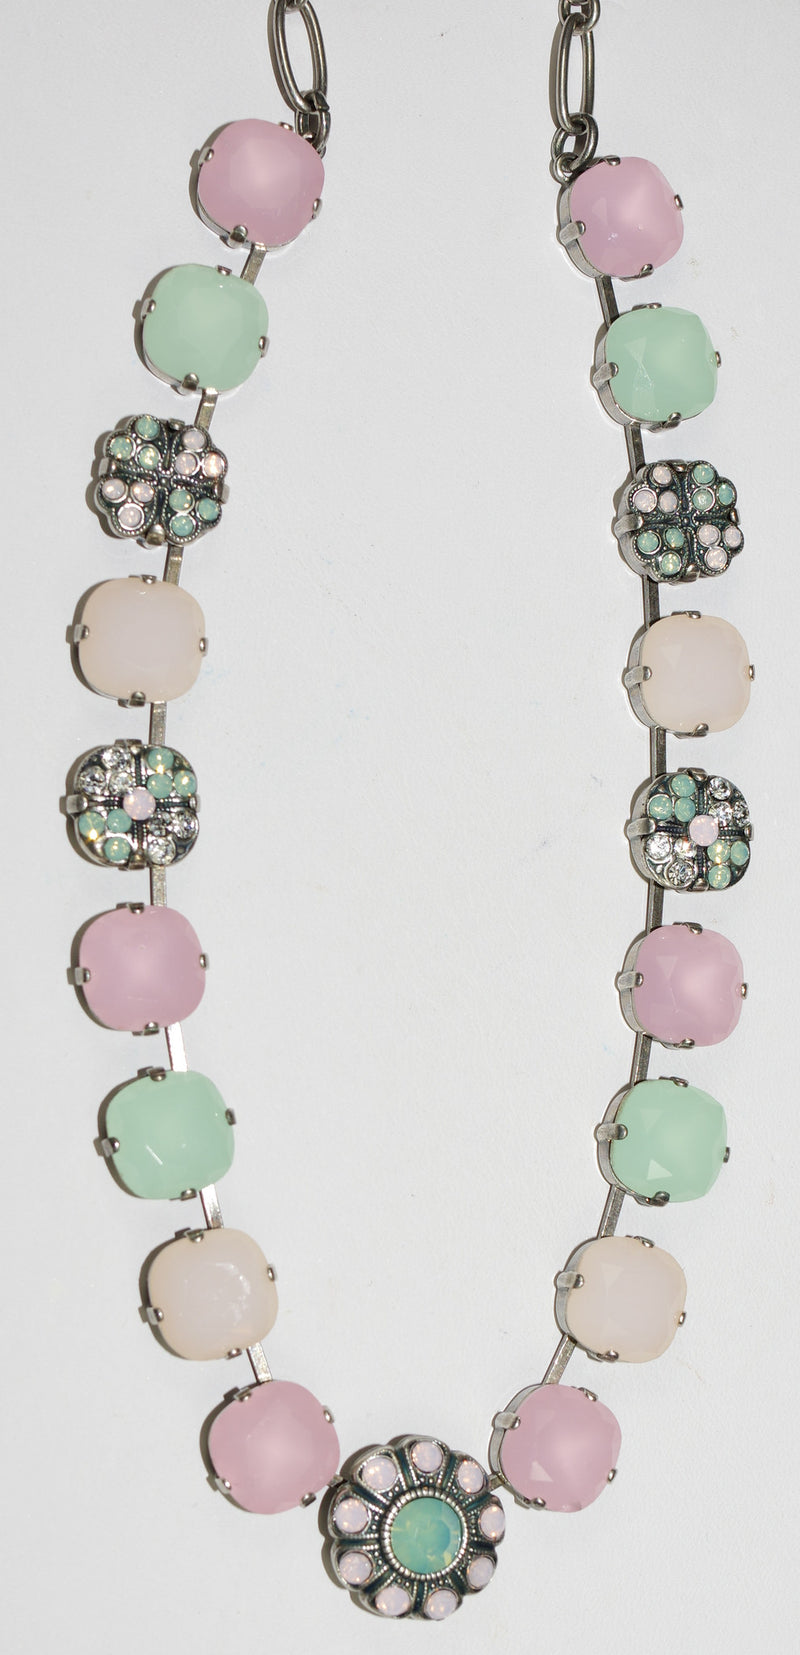 MARIANA NECKLACE PINA COLADA: pacific opal, pink stones in silver setting, center stone = .75", 18" adjustable chain